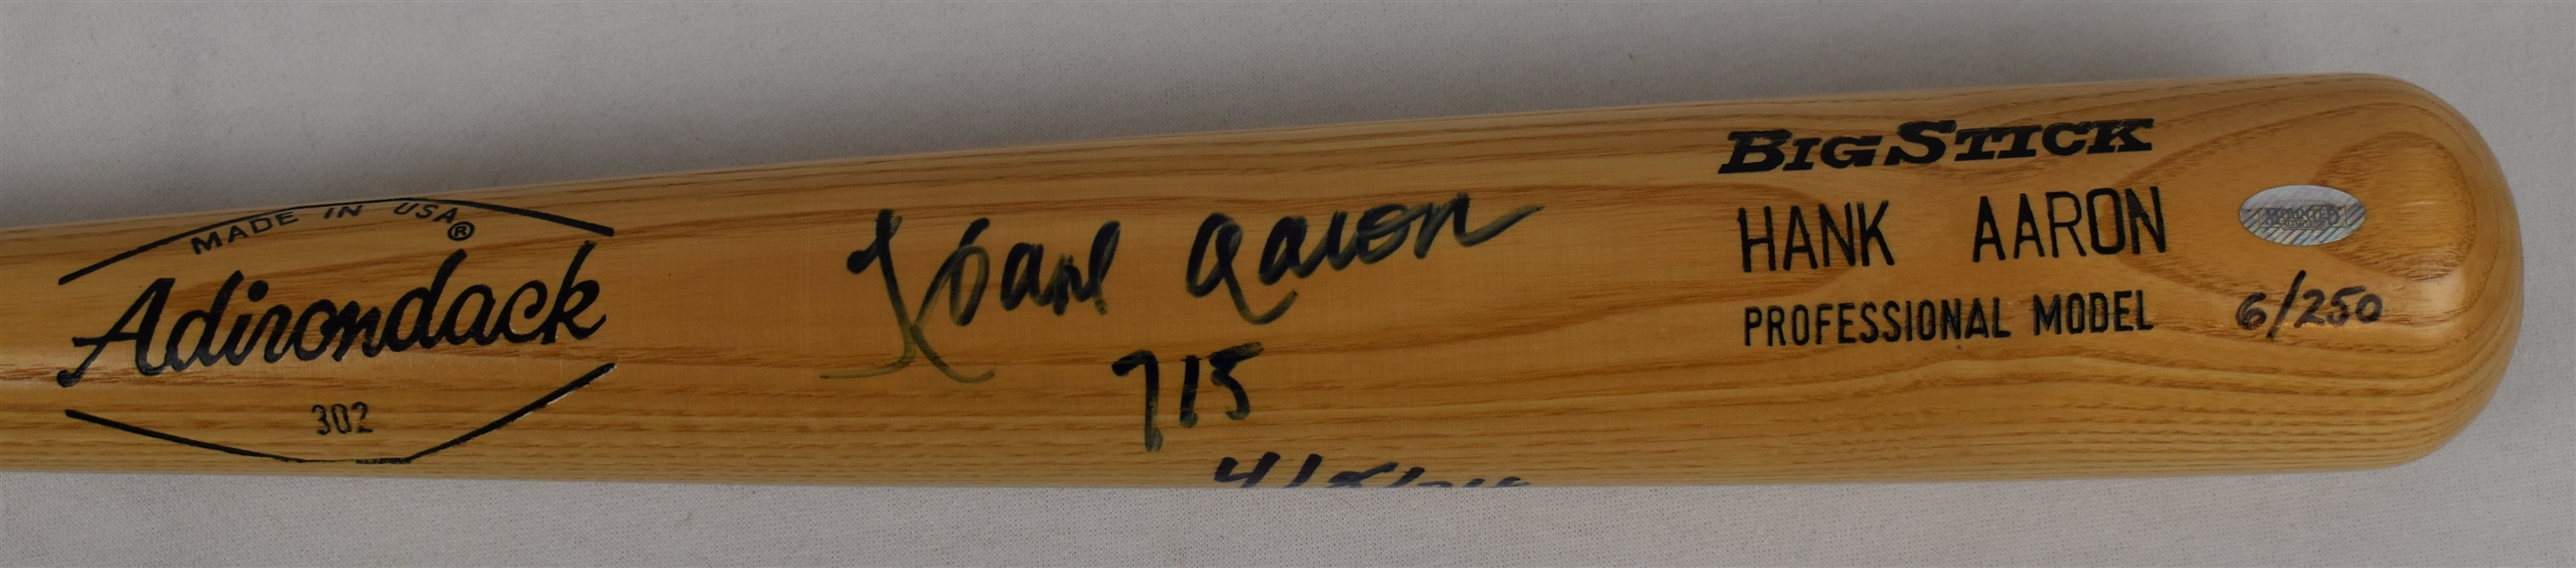 Hank Aaron Autographed & Inscribed 715 4/8/74 Limited Edition Bat